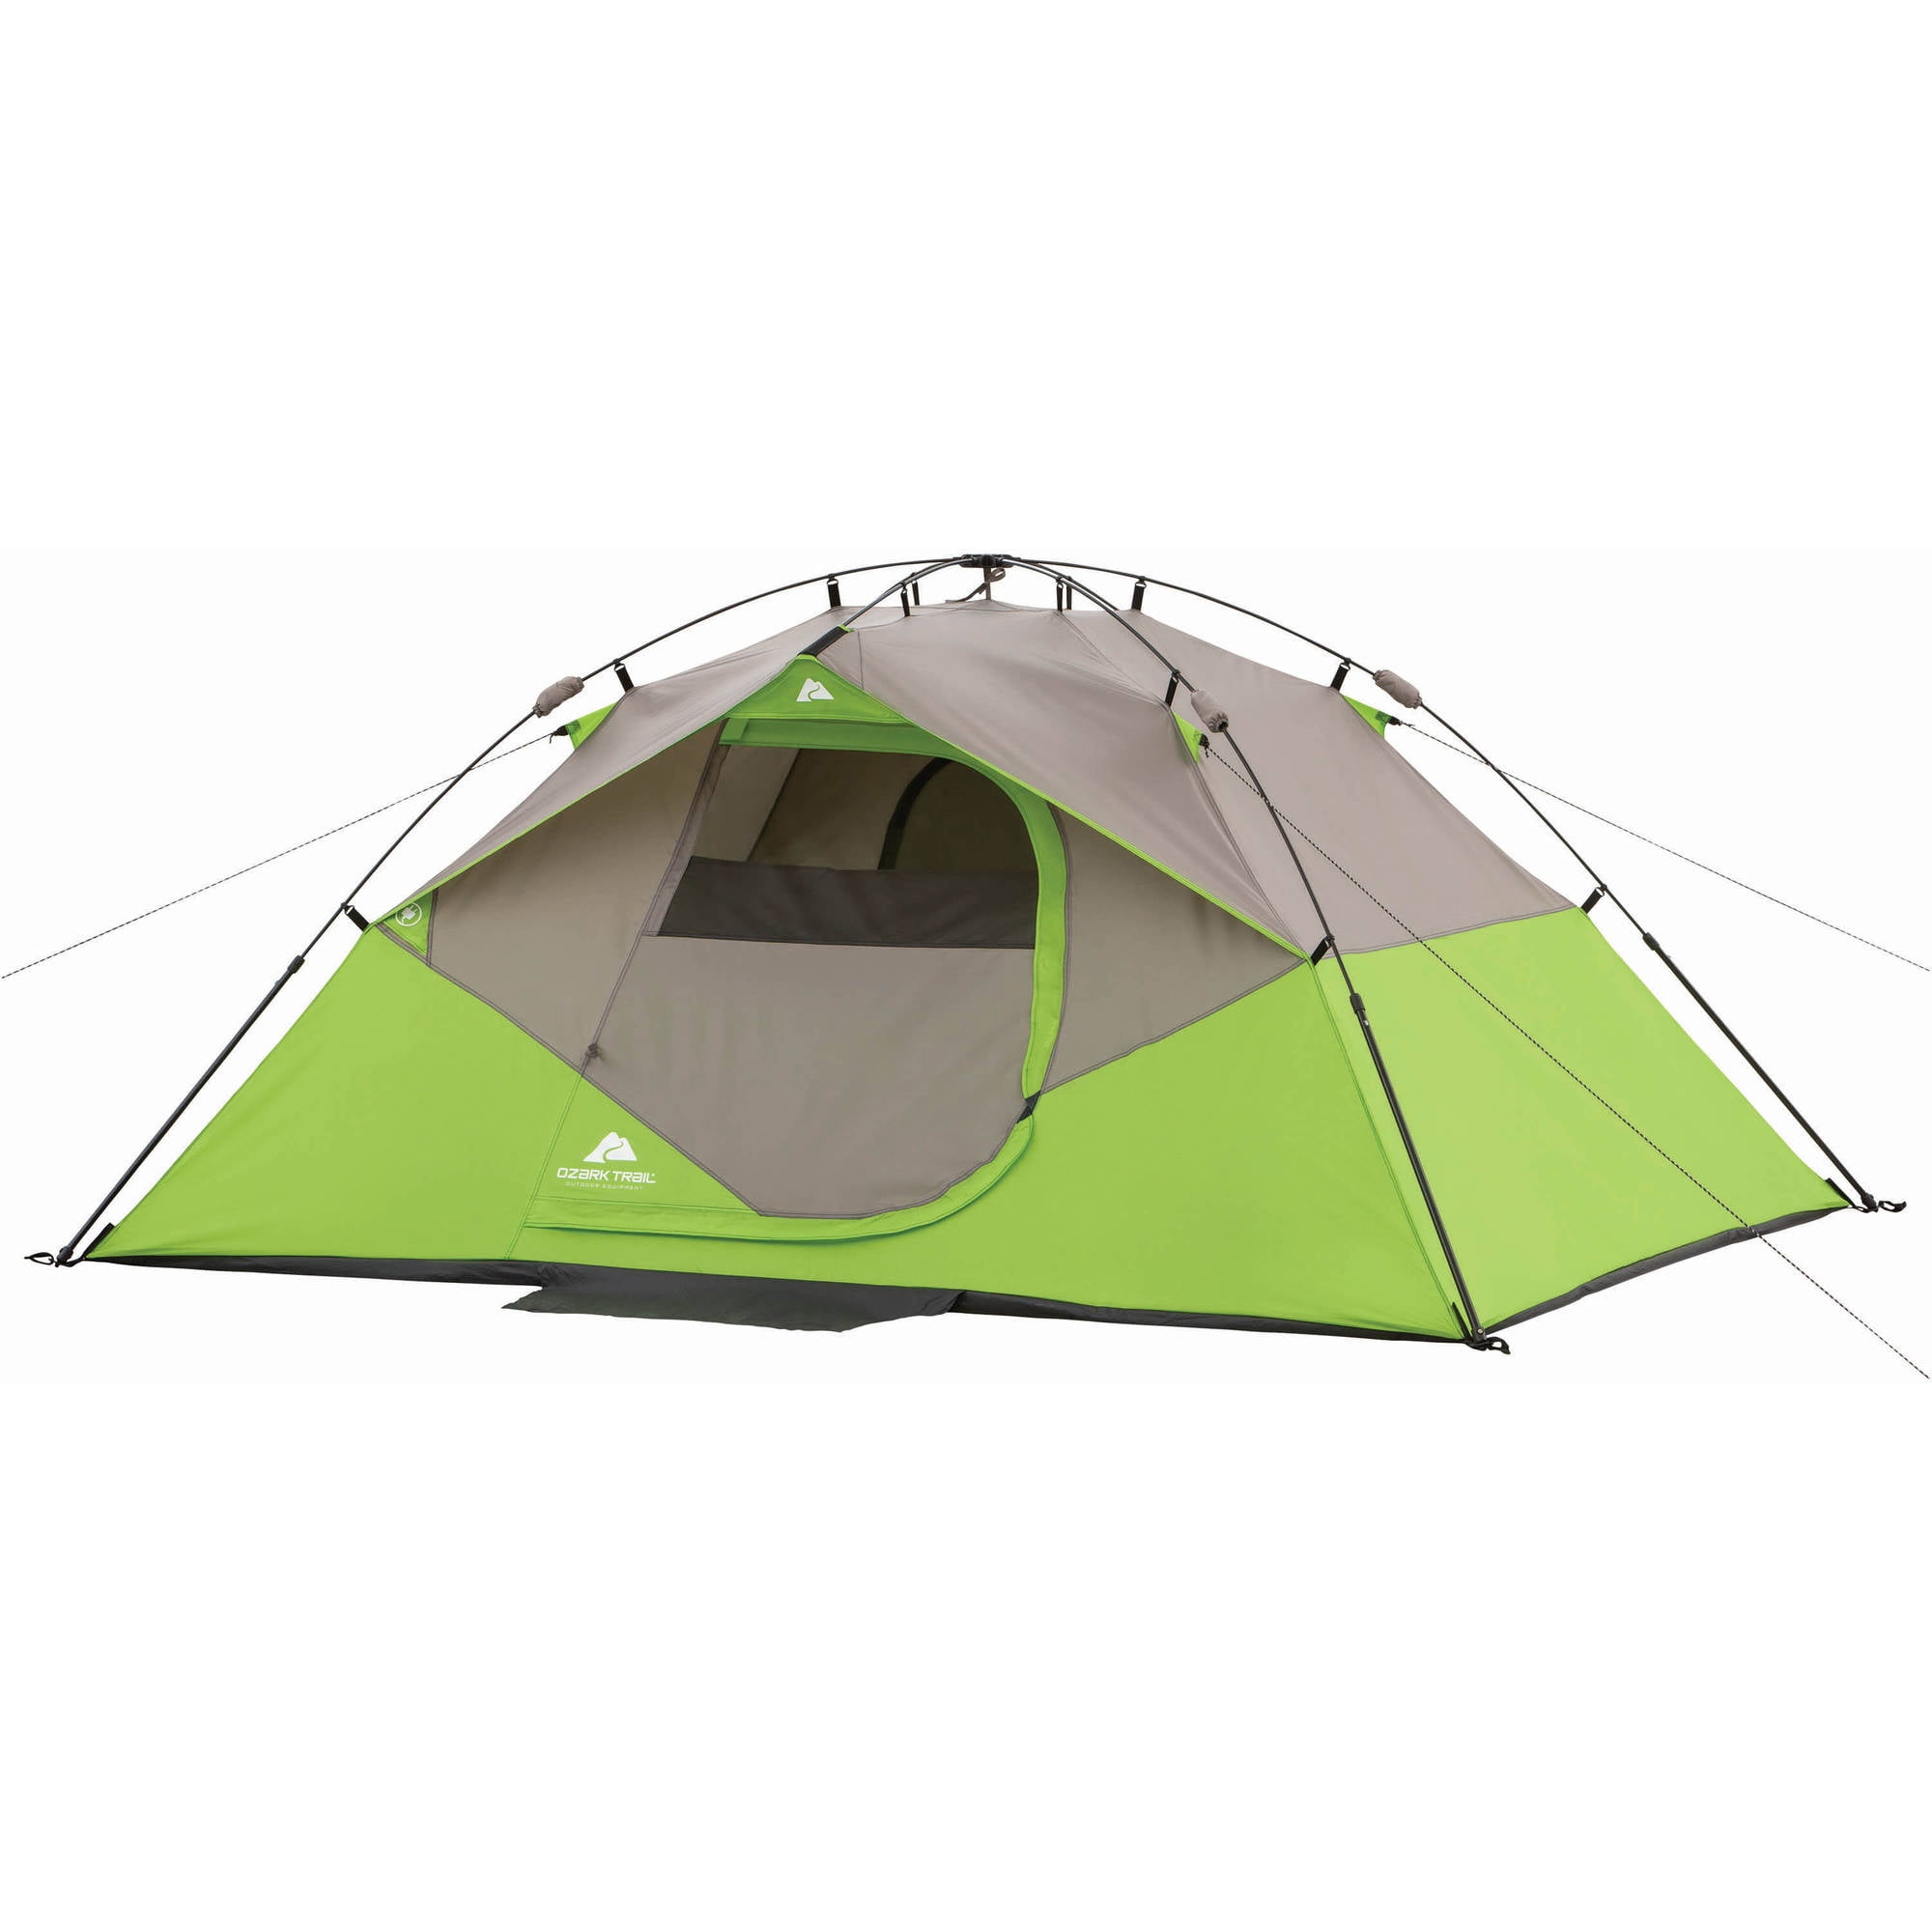 Shop Ozark Trail 9' x 7' Instant Dome Camping Tent, Sleeps 4 - Great ...